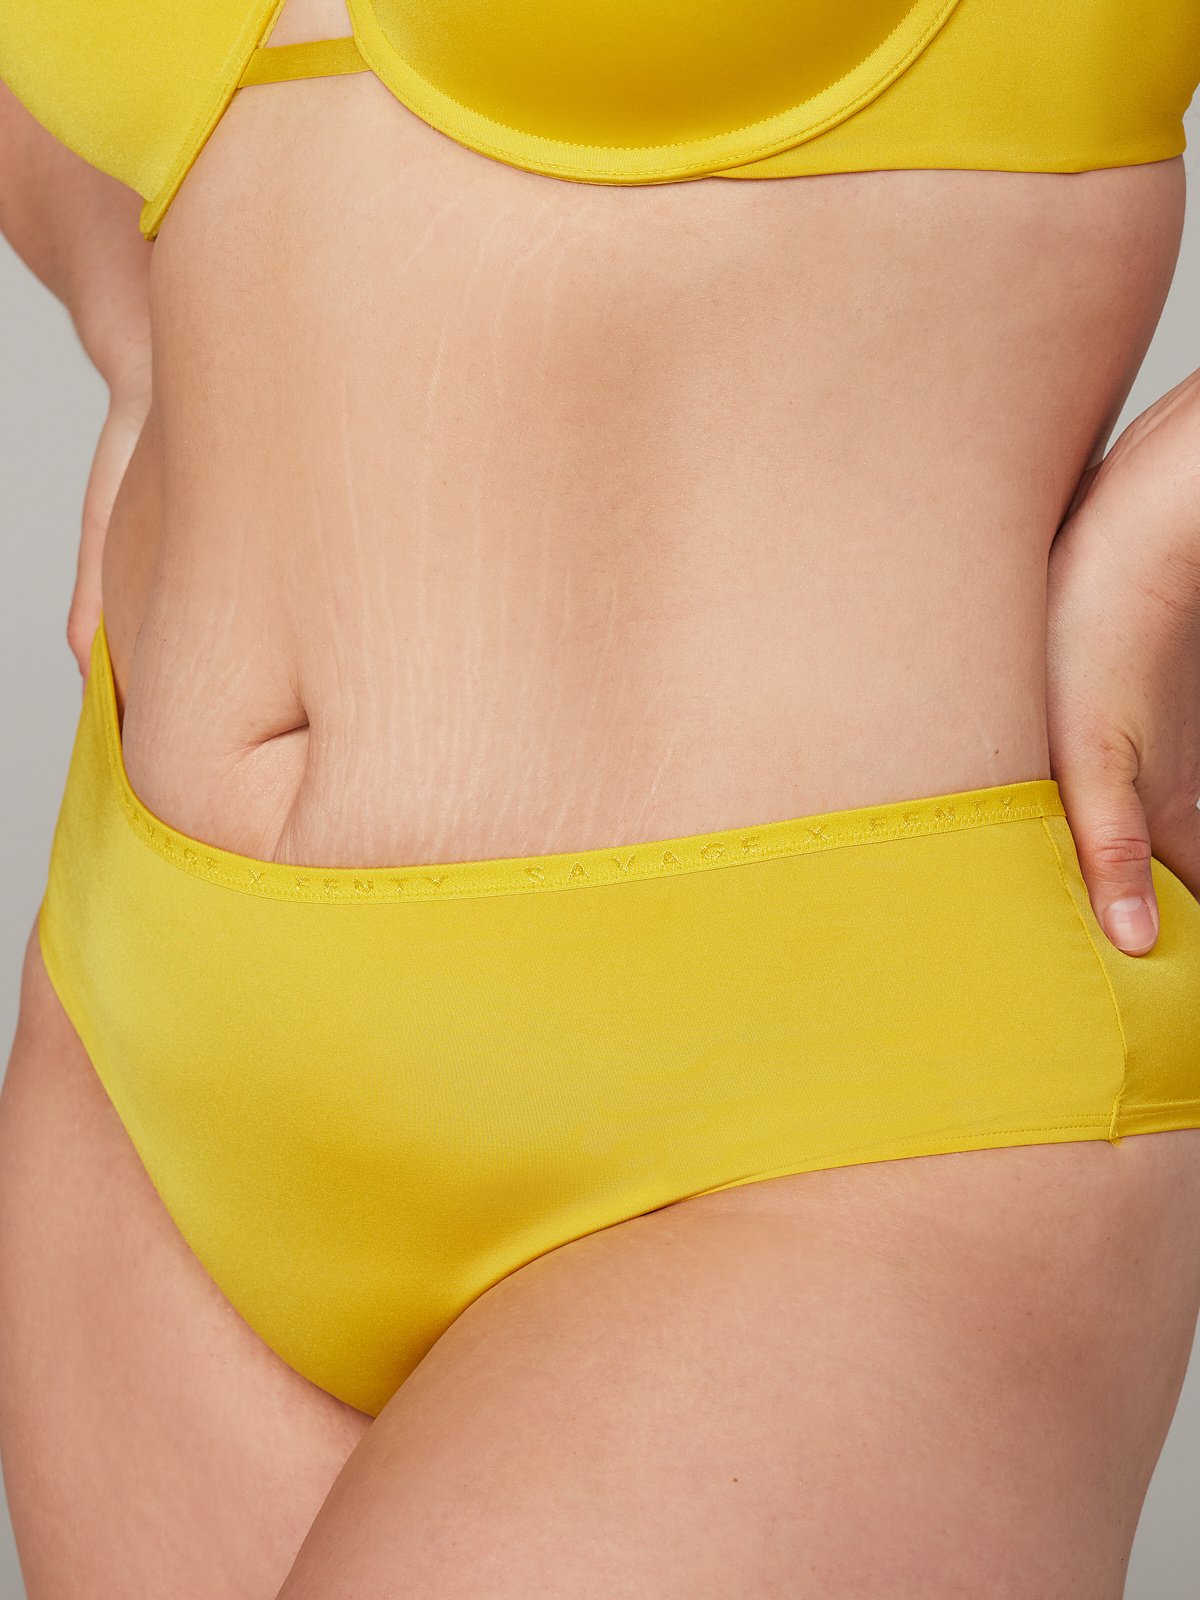 NEW Microfiber Hipster Panty in Gold & Yellow